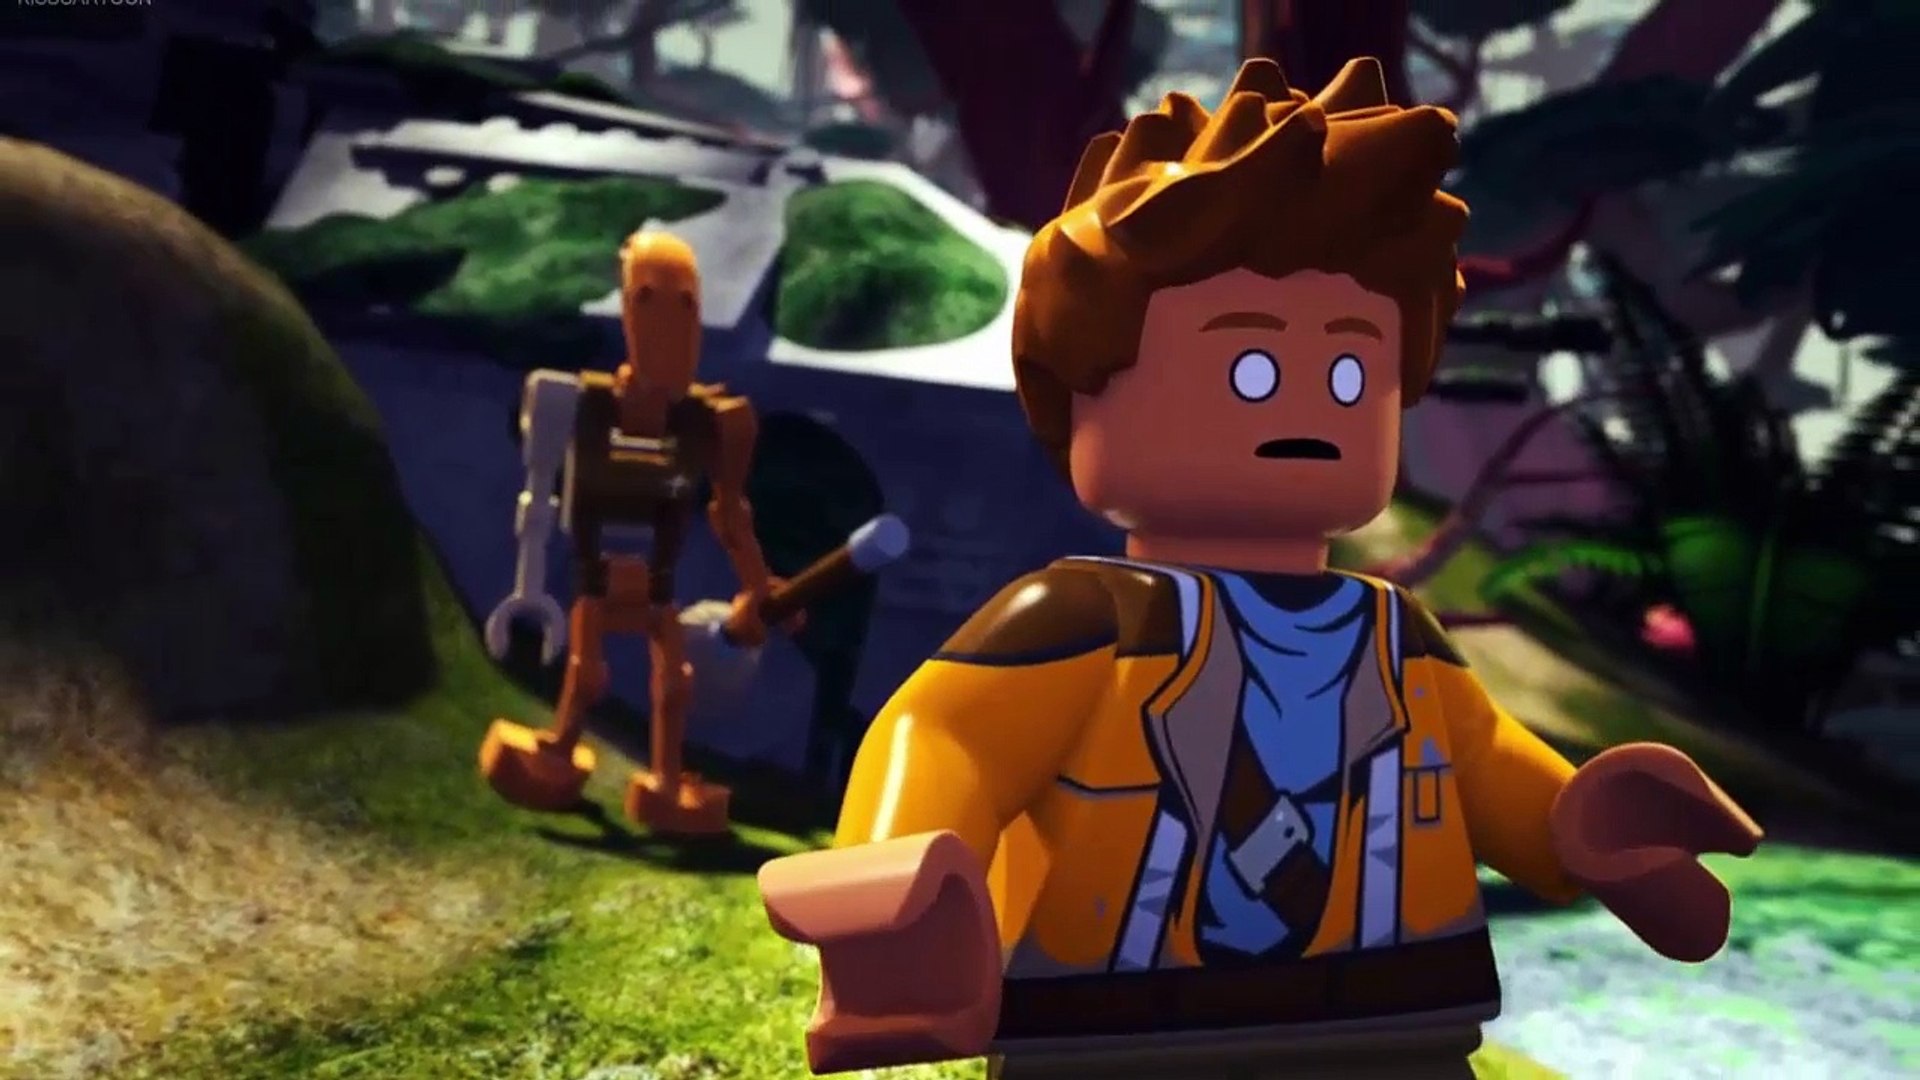 Lego Star Wars: The Freemaker Adventures - Episode 1 - Video Dailymotion